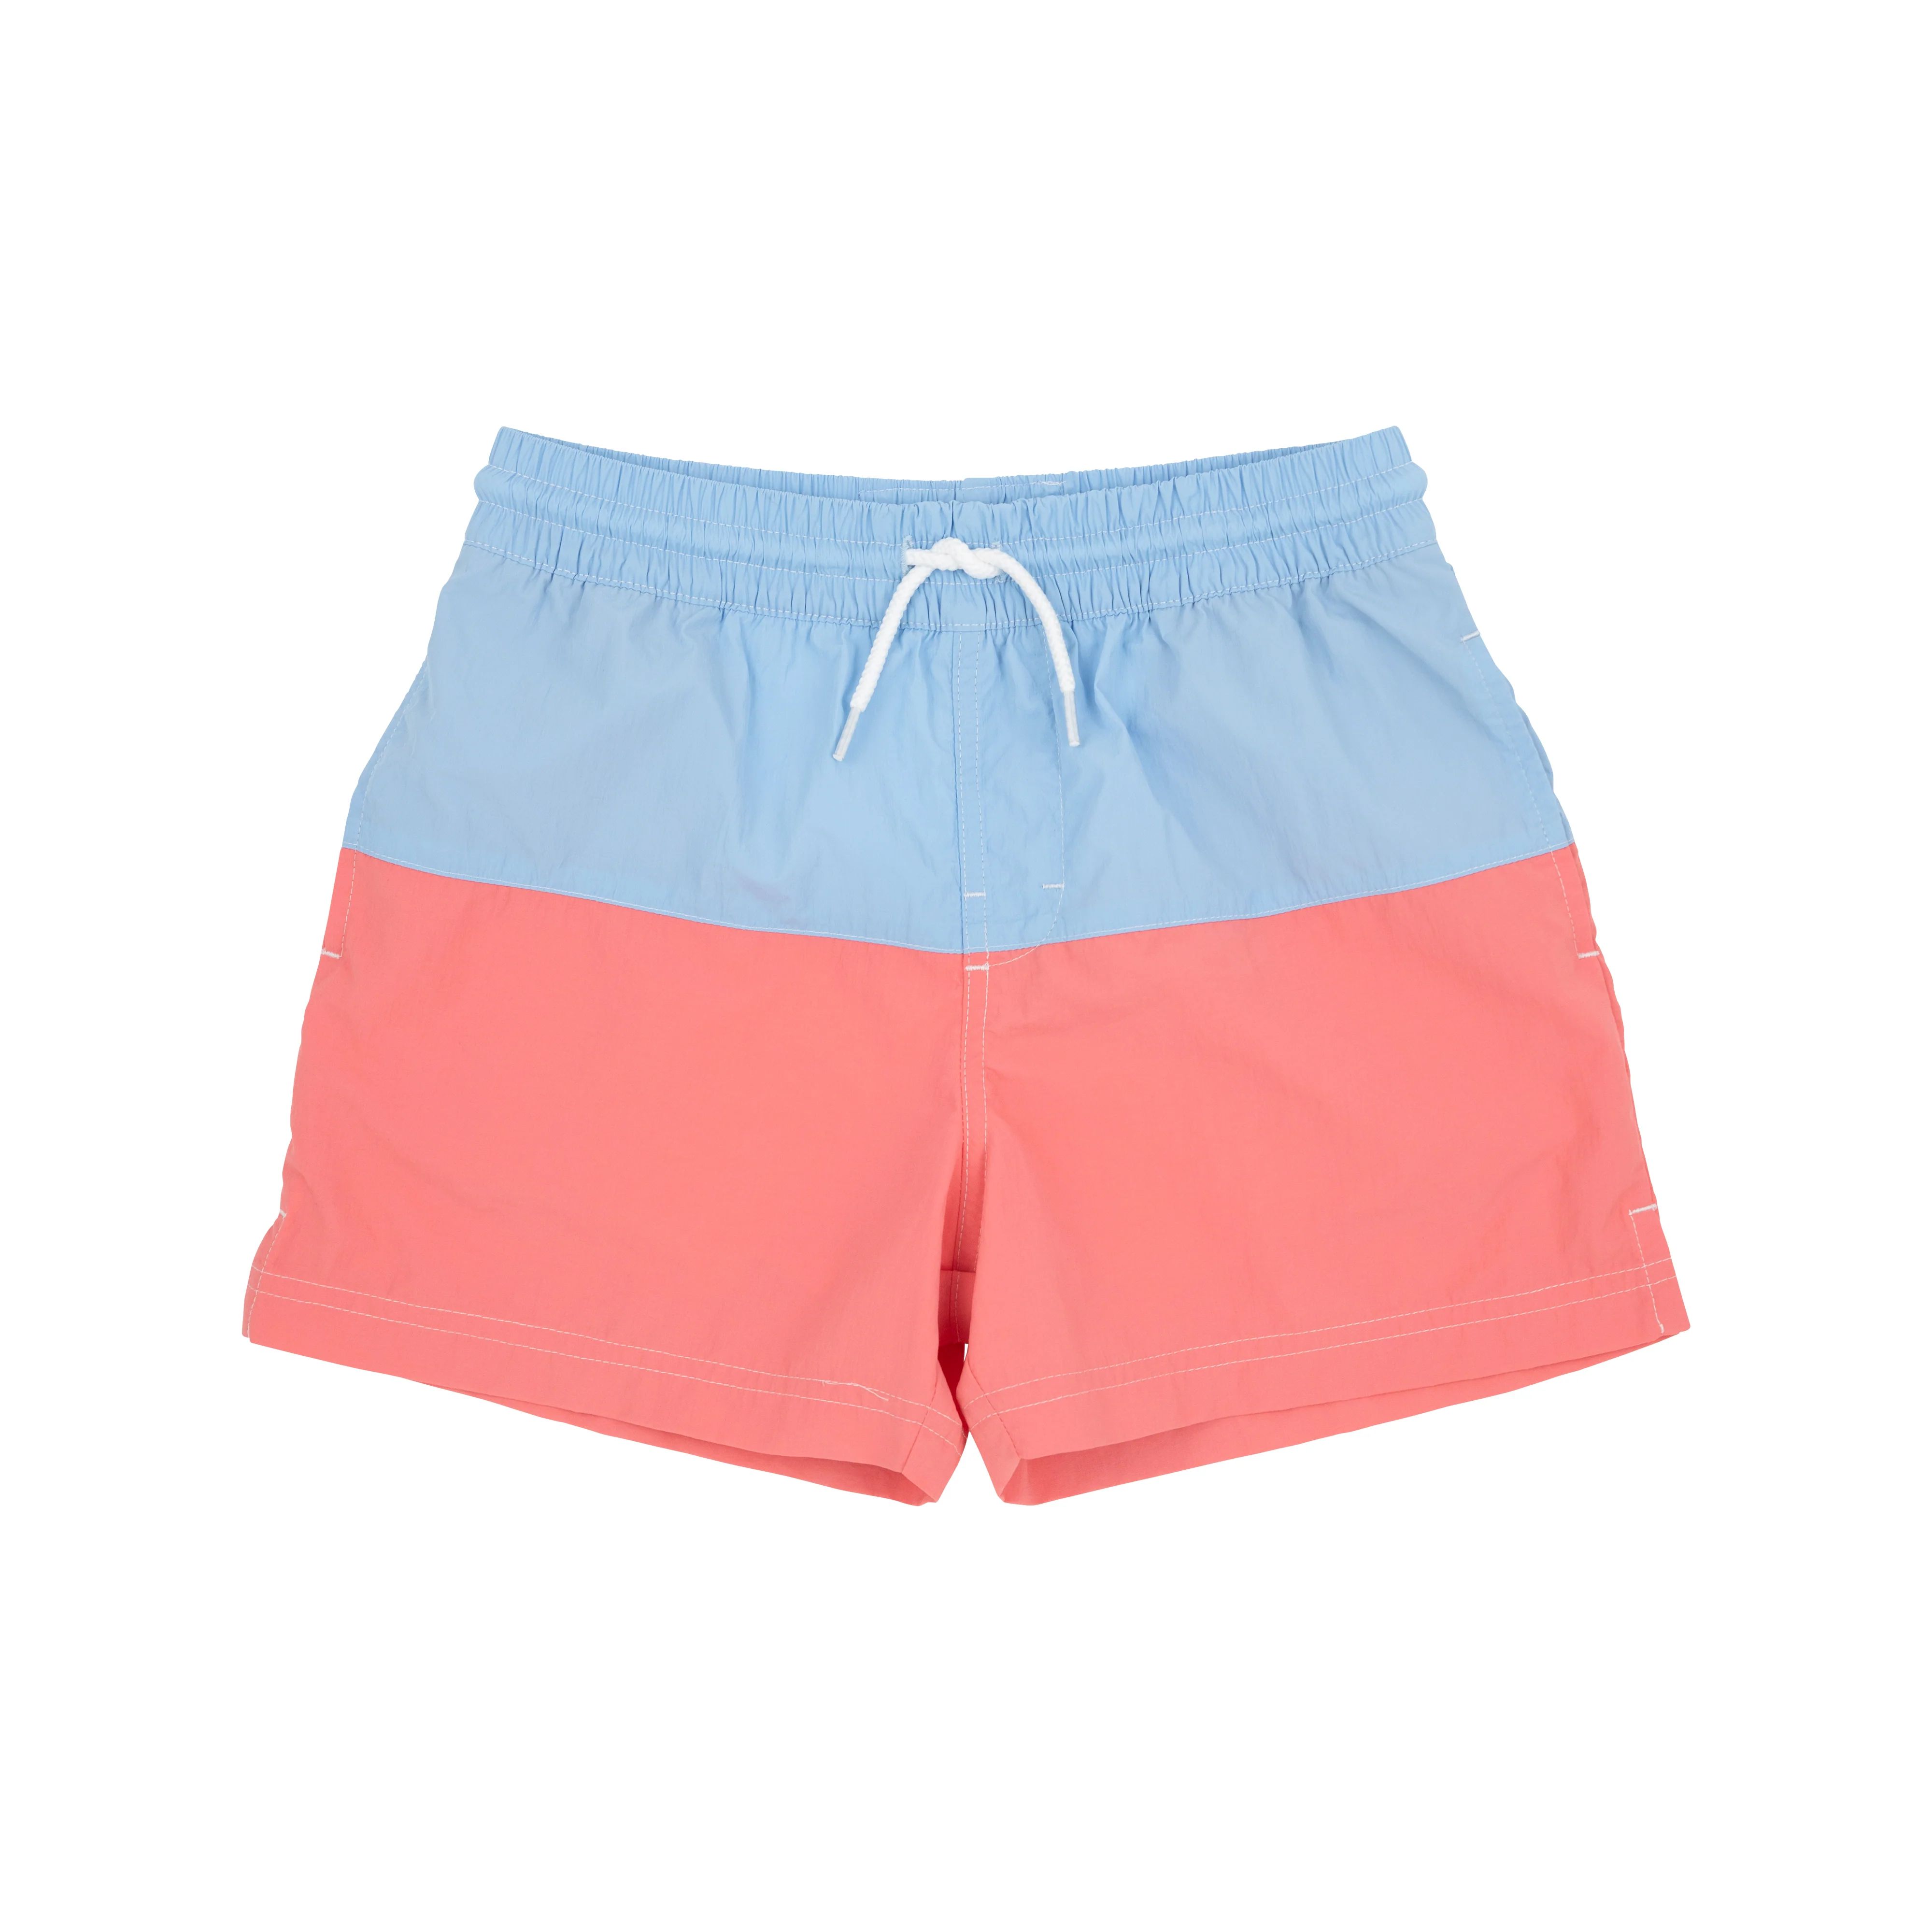 Country Club Colorblock Trunks - Beale Street Blue & Parrot Cay Coral with T.B.B.C. Pocket | The Beaufort Bonnet Company